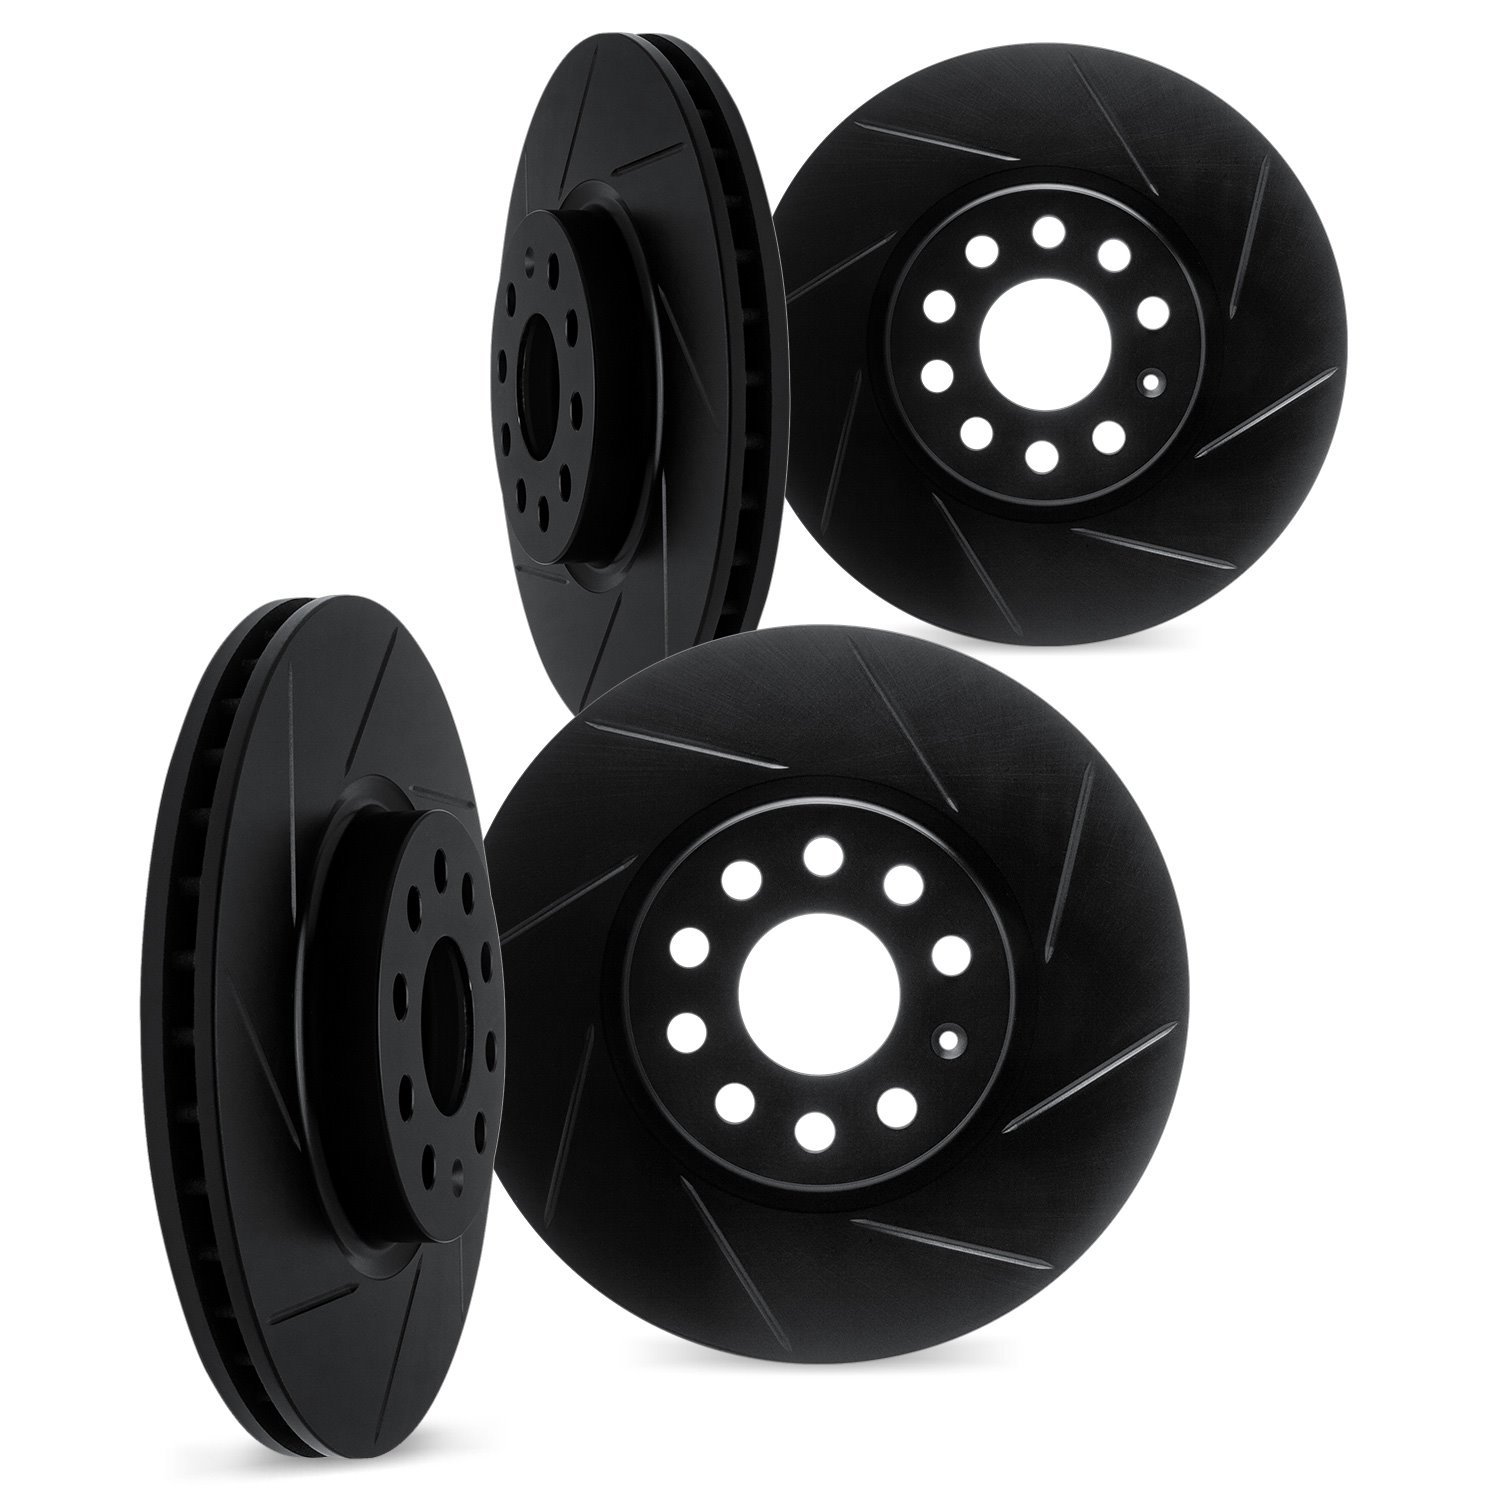 3004-13002 Slotted Brake Rotors [Black], Fits Select Multiple Makes/Models, Position: Front and Rear